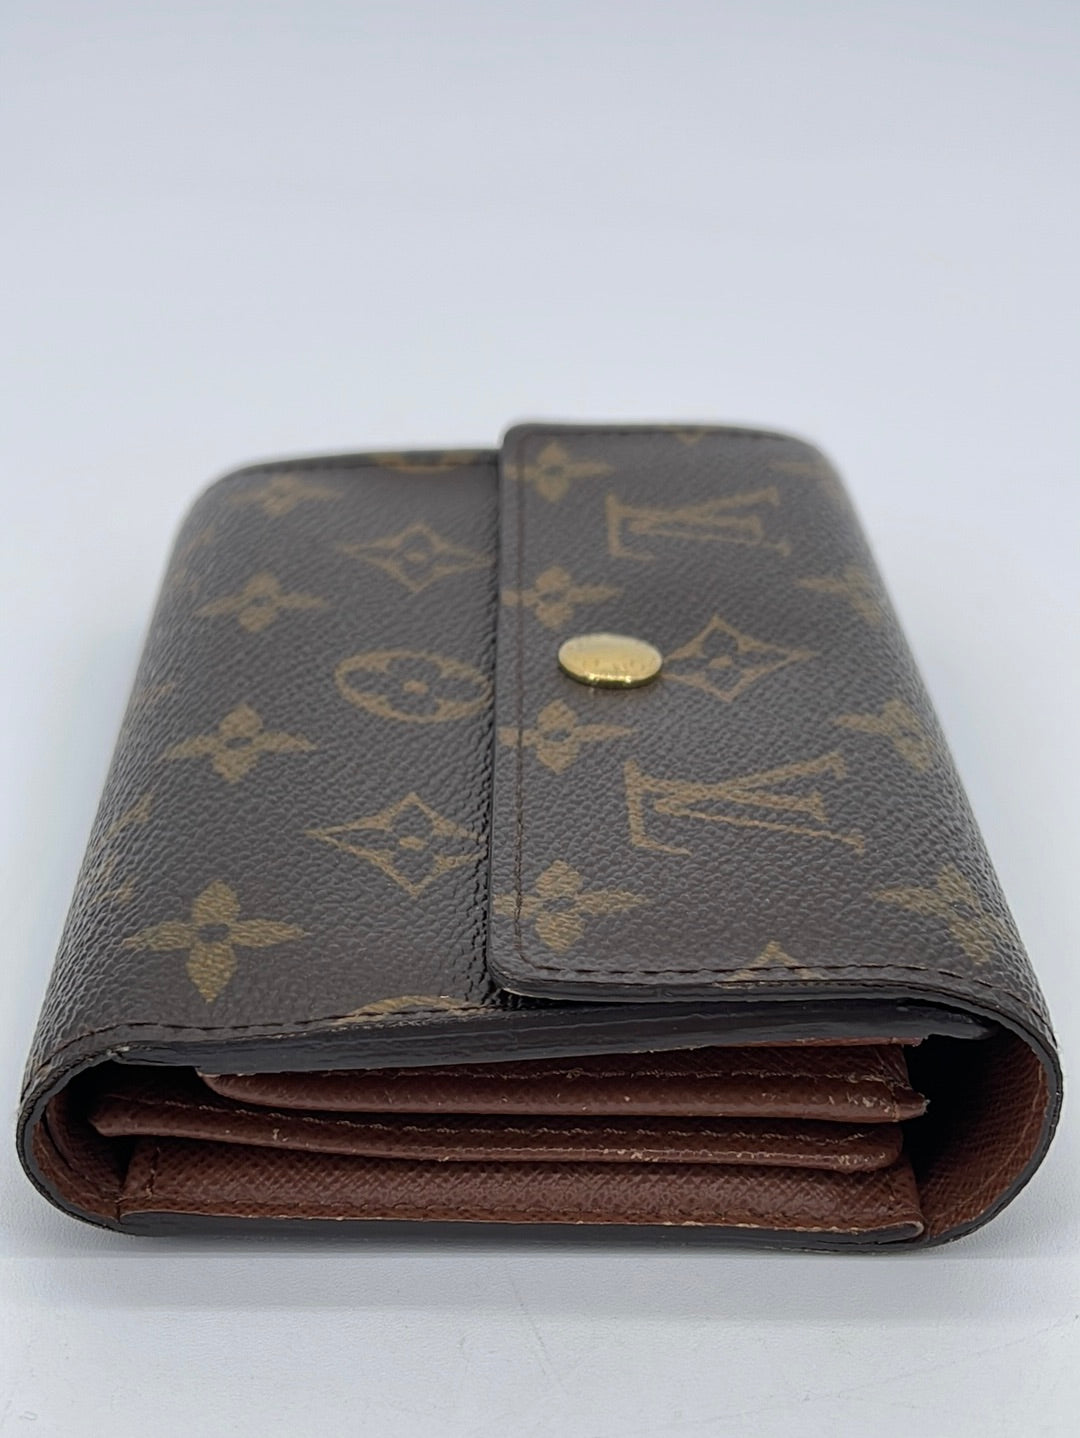 Authenticated used Louis Vuitton Louis Vuitton Portefeuille Palace Compact Trifold Wallet M67479 Monogram Canvas Leather Brown Black Gold Metal